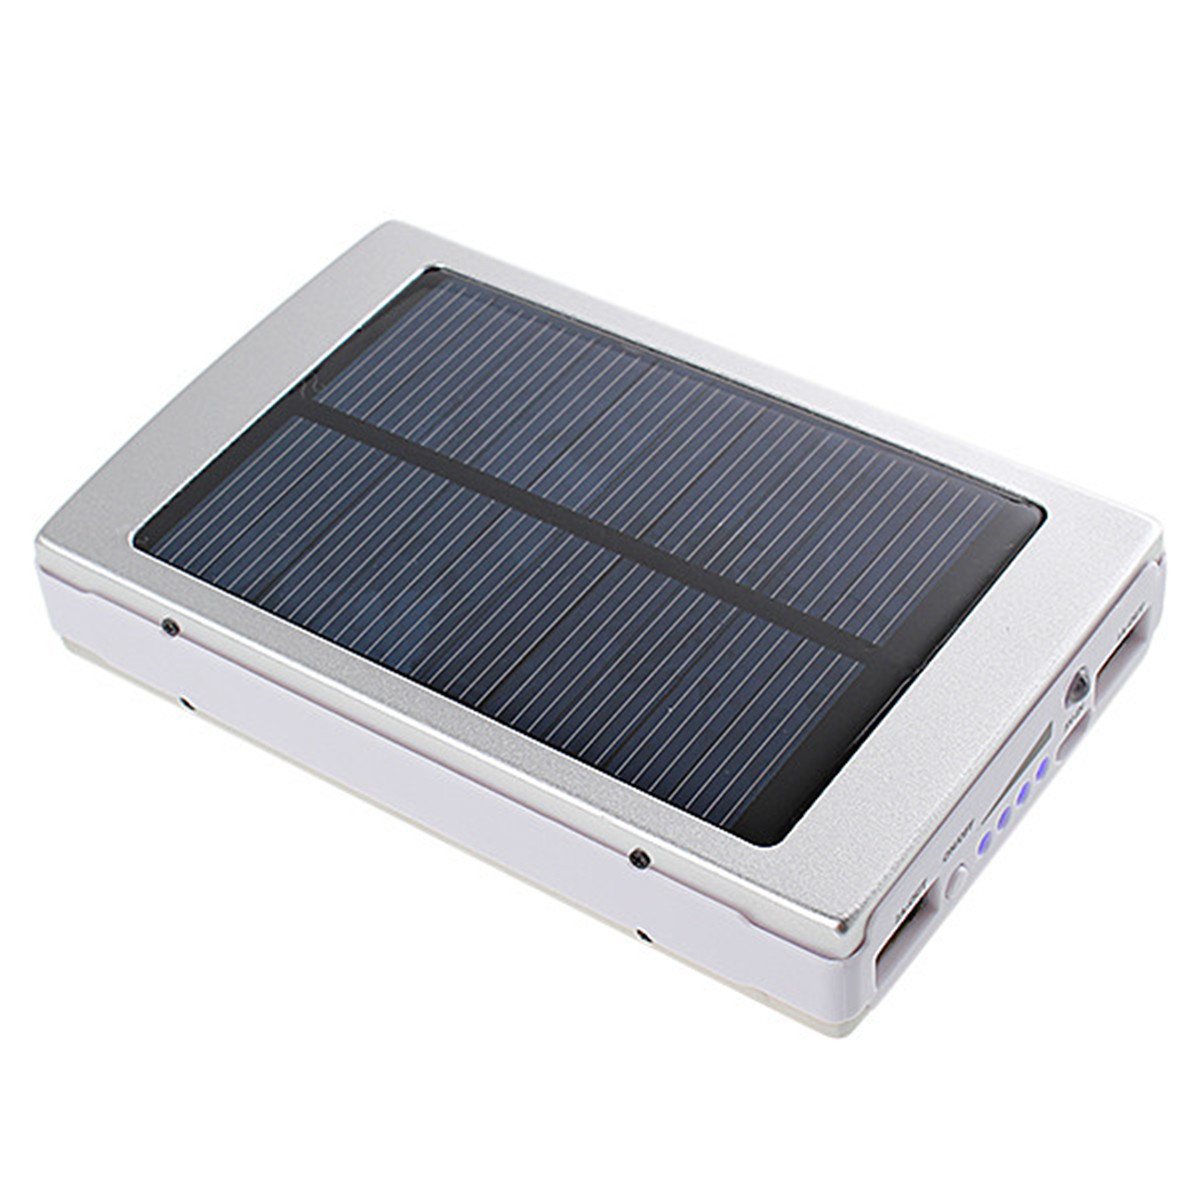 Portable-Solar-Panel-Dual-USB-External-Mobile-Battery-Power-Bank-Pack-Charger-for-iPhone-HTC-1419461-6